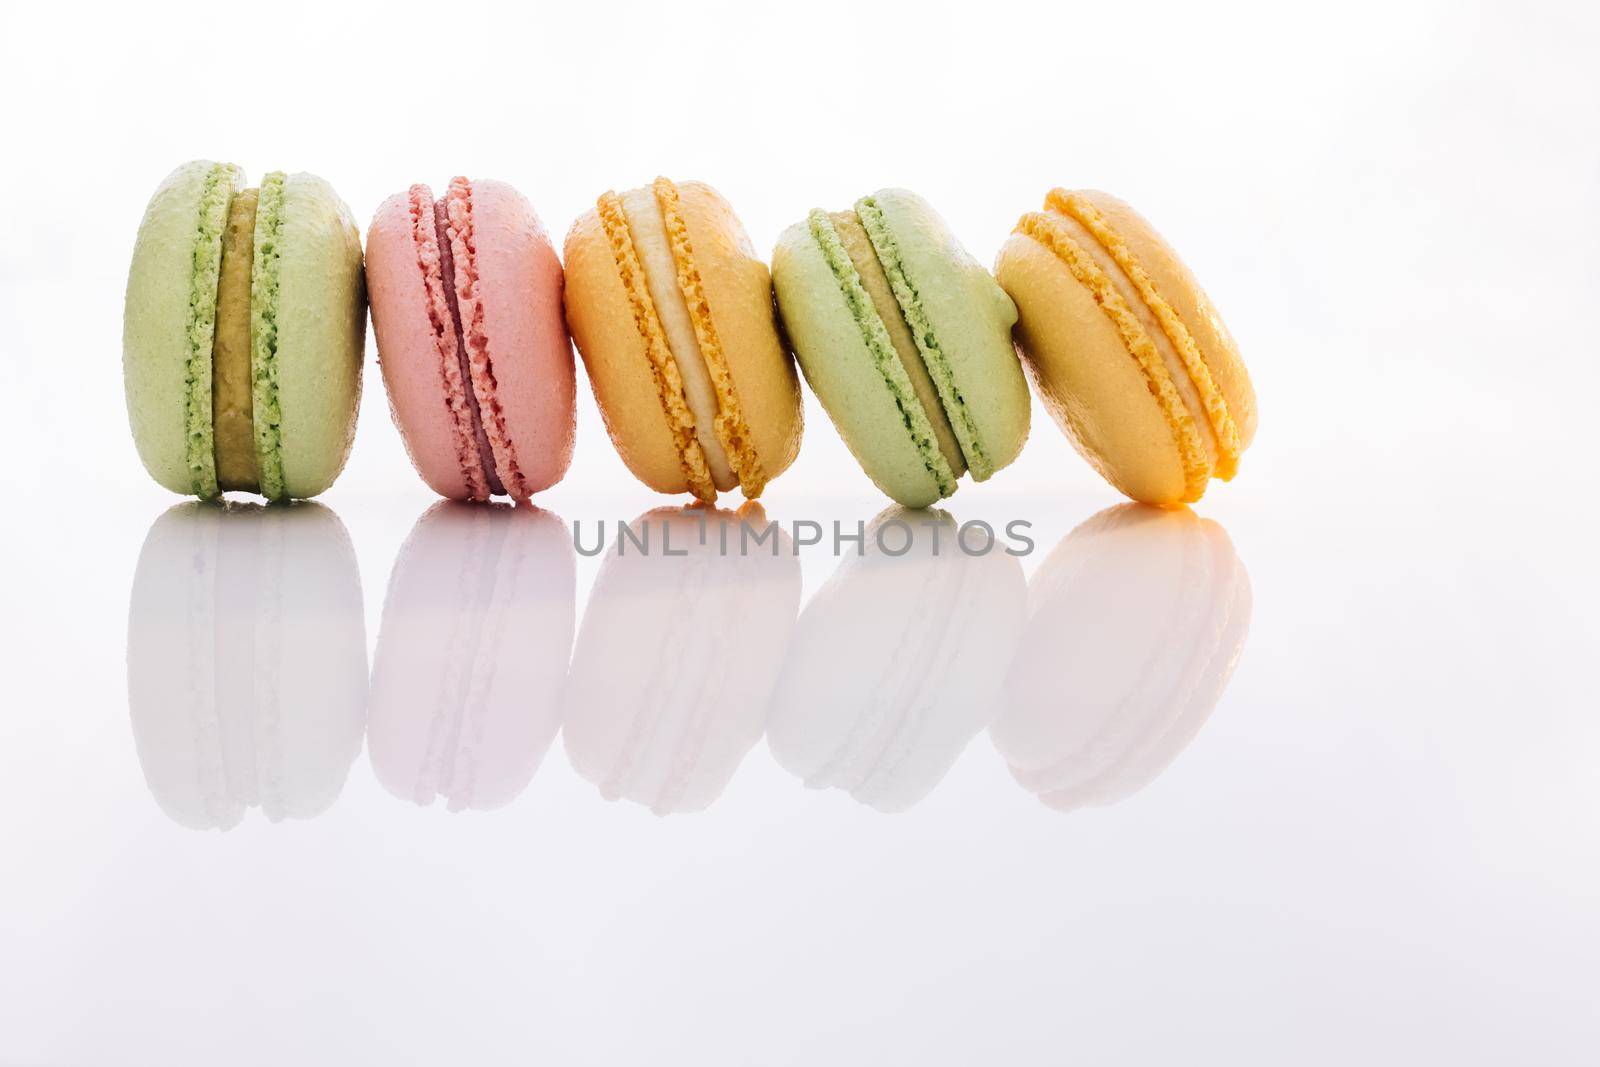 Different colorful macaroon. Tasty sweet color macaron. Colorful macarons dessert. French macarons on white background.